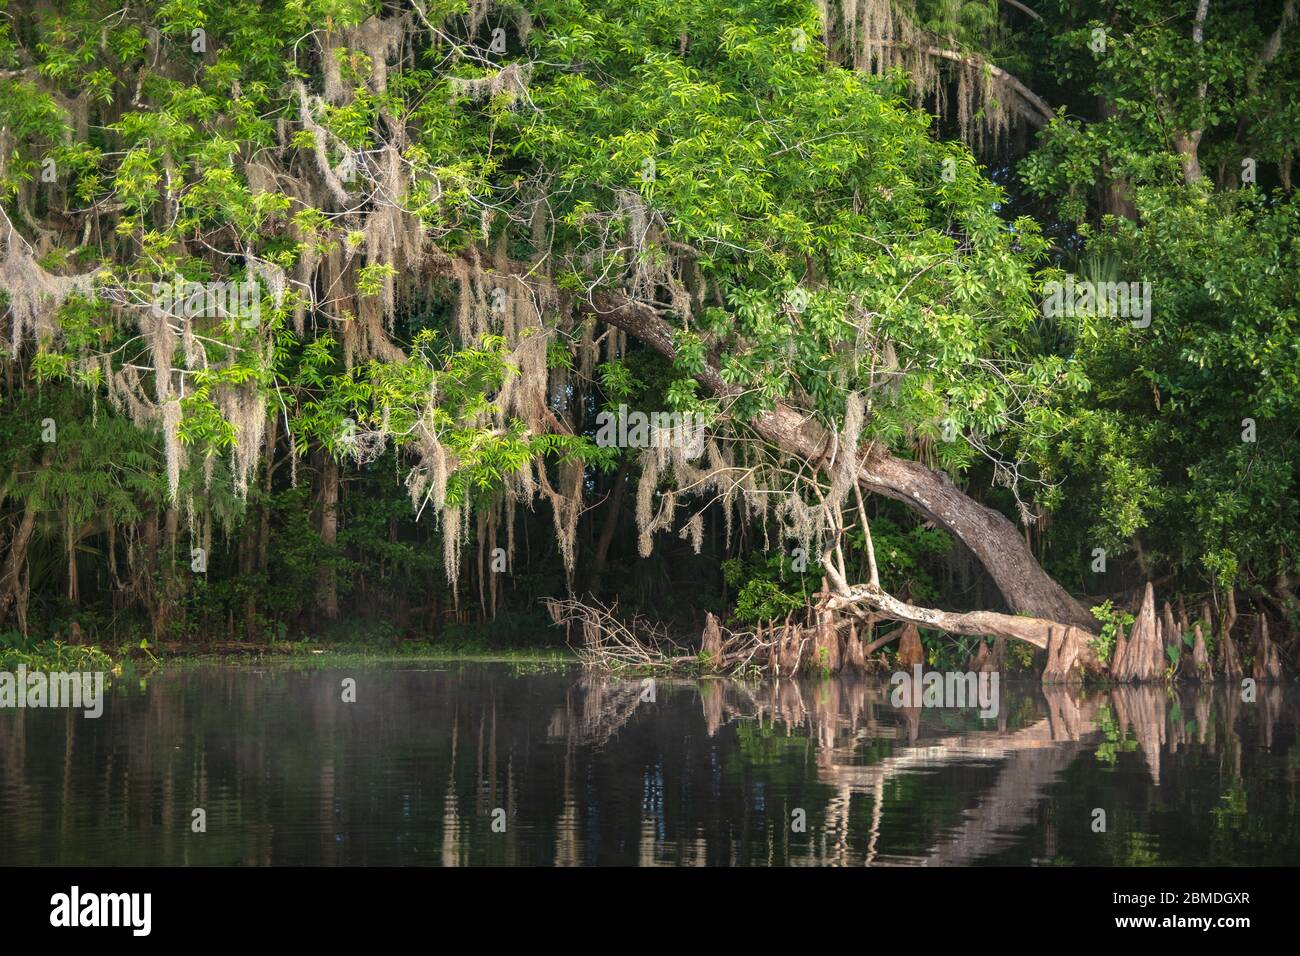 Spanish moss hangs from cypress trees along the bank of the wild and scenic Withlacoochee River in Dunnellon, Florida. Stock Photo